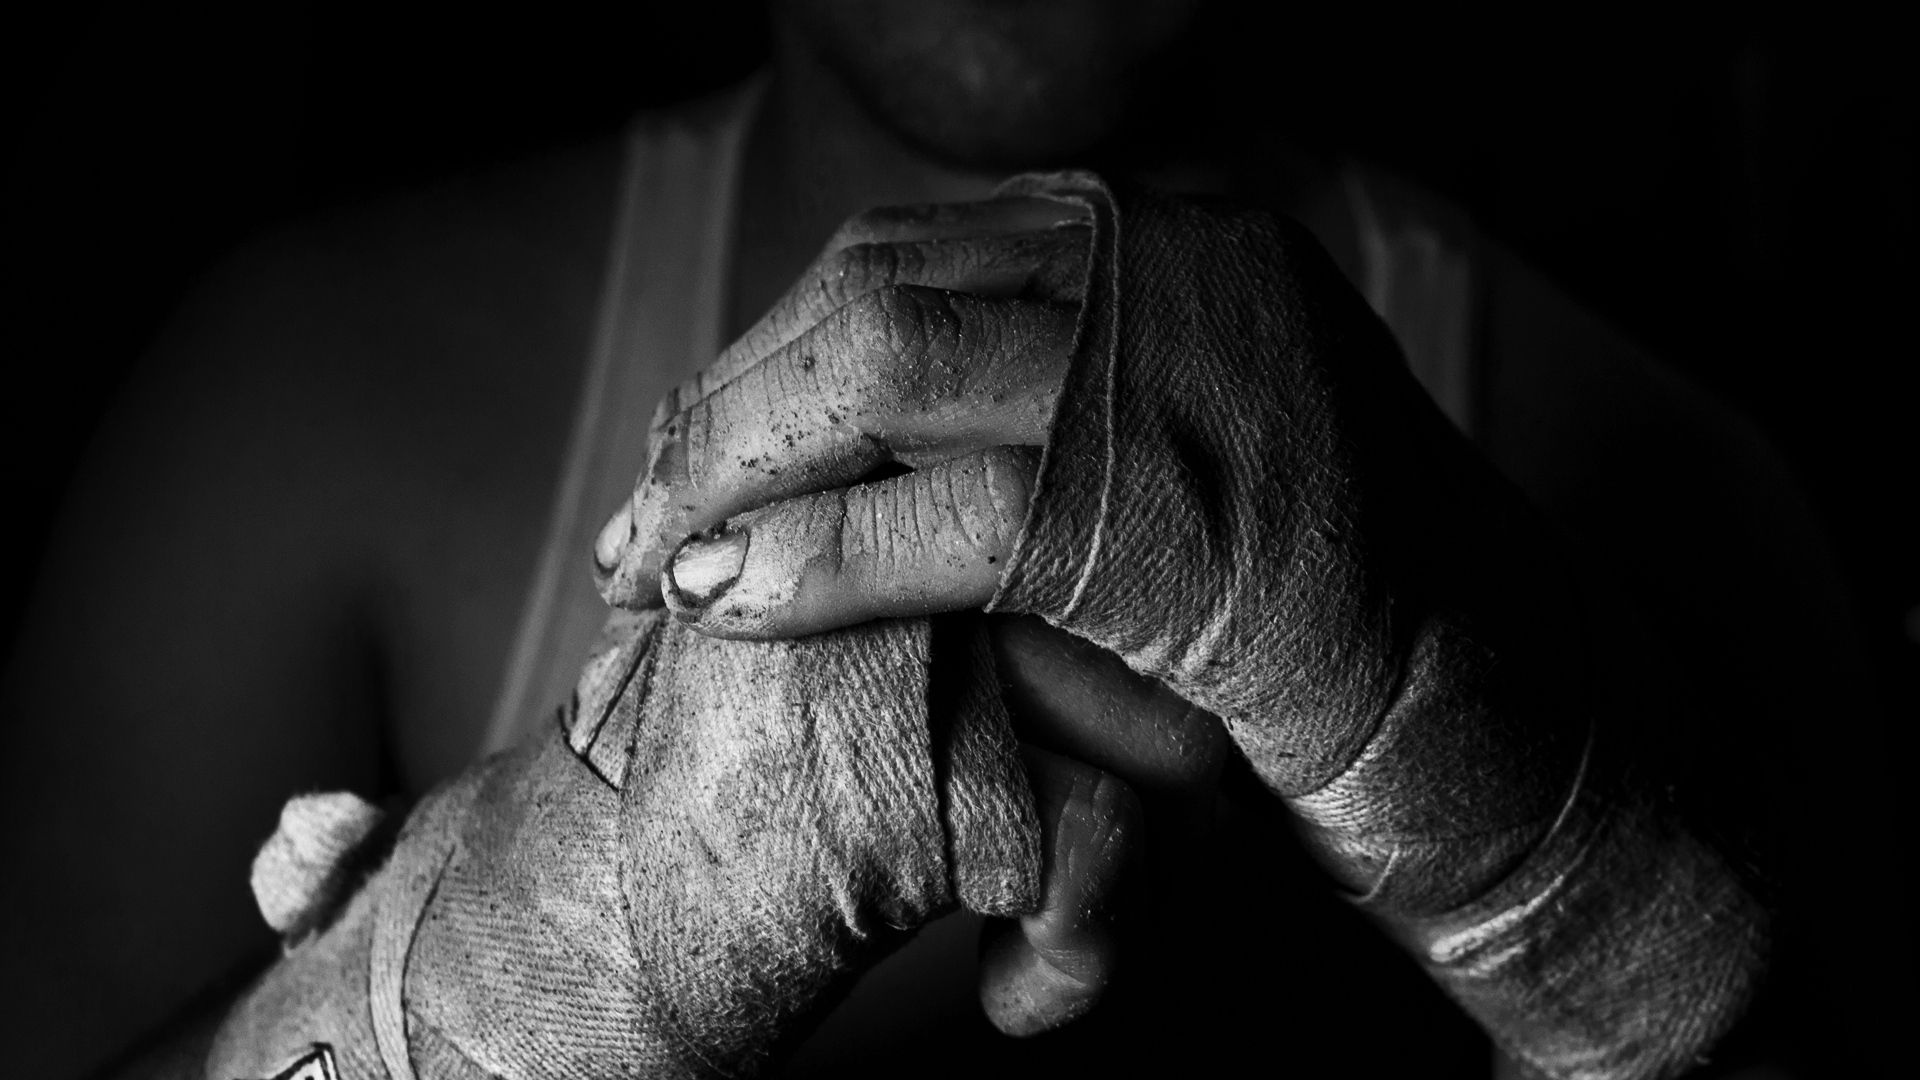 chb, sports, hands, bw, fighter, bandages mobile wallpaper